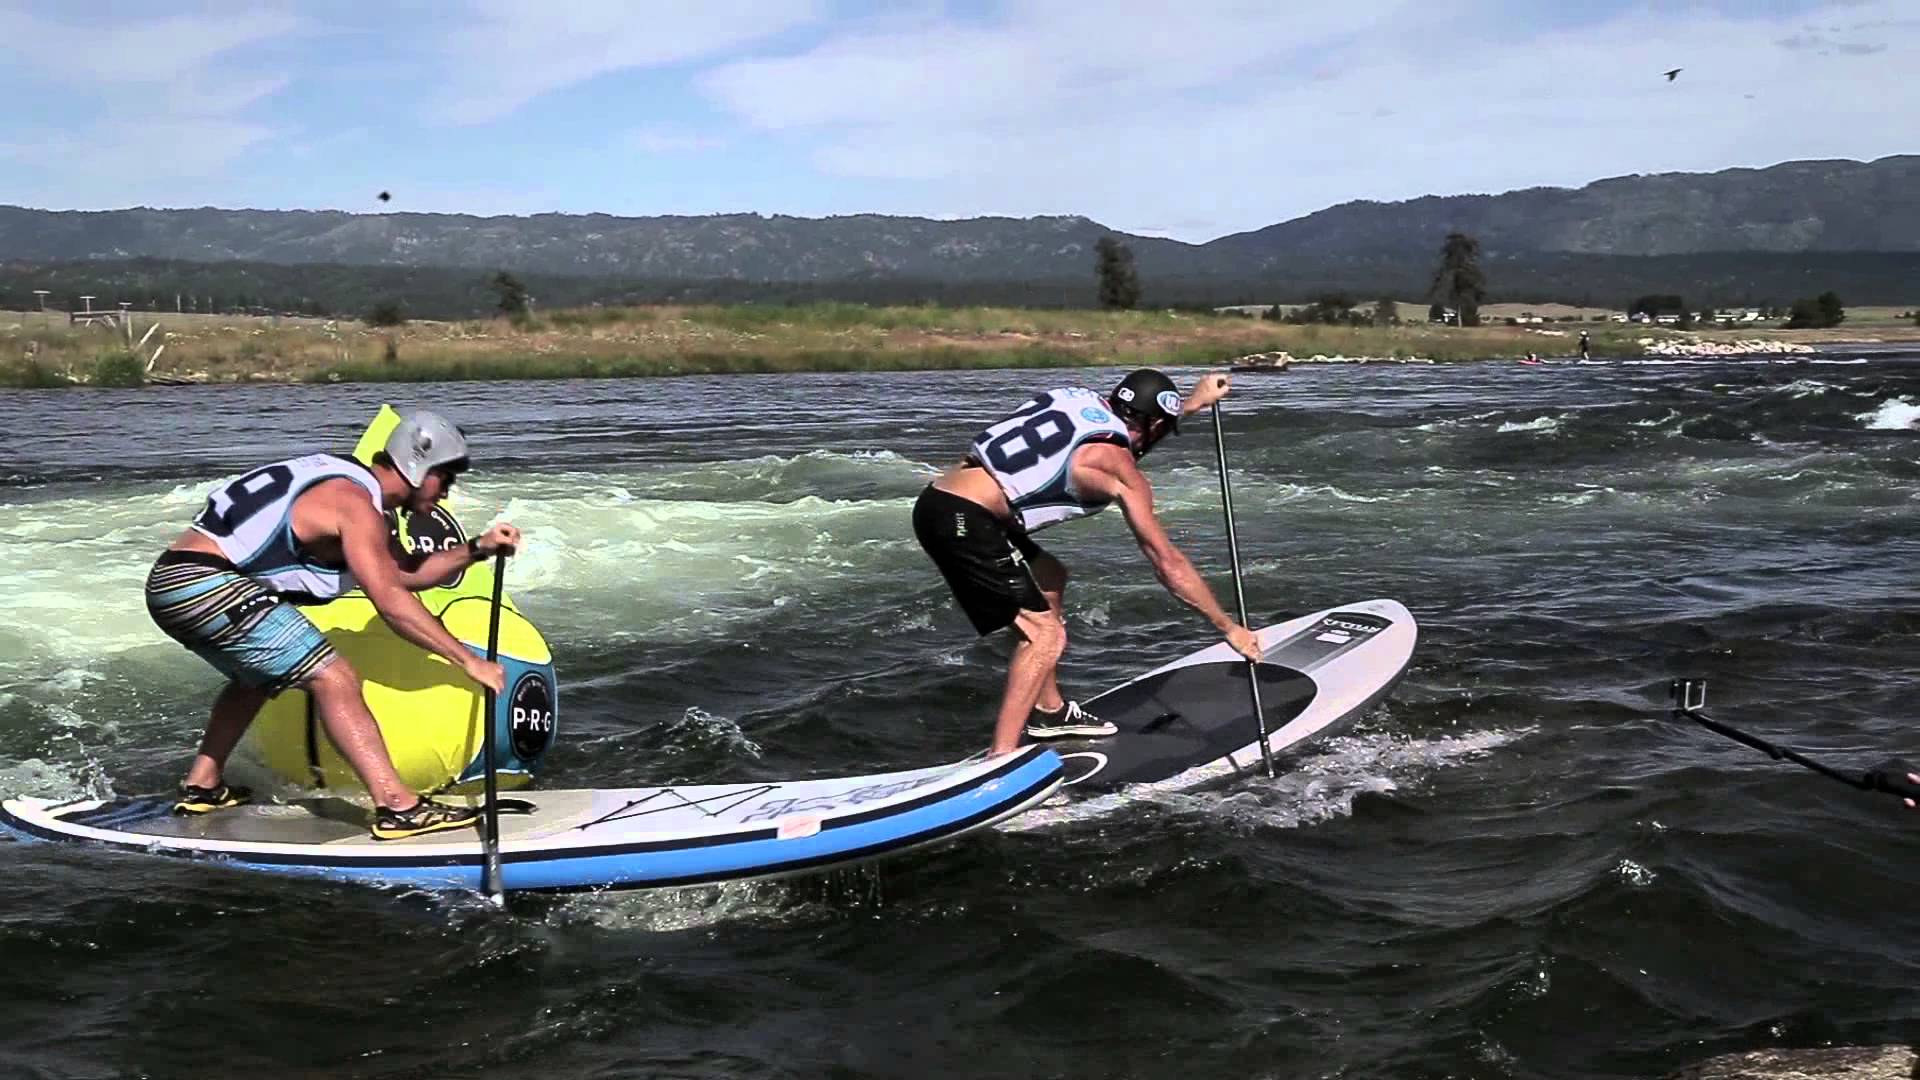 The Payette River Games 2015 as seen by QuickBlade